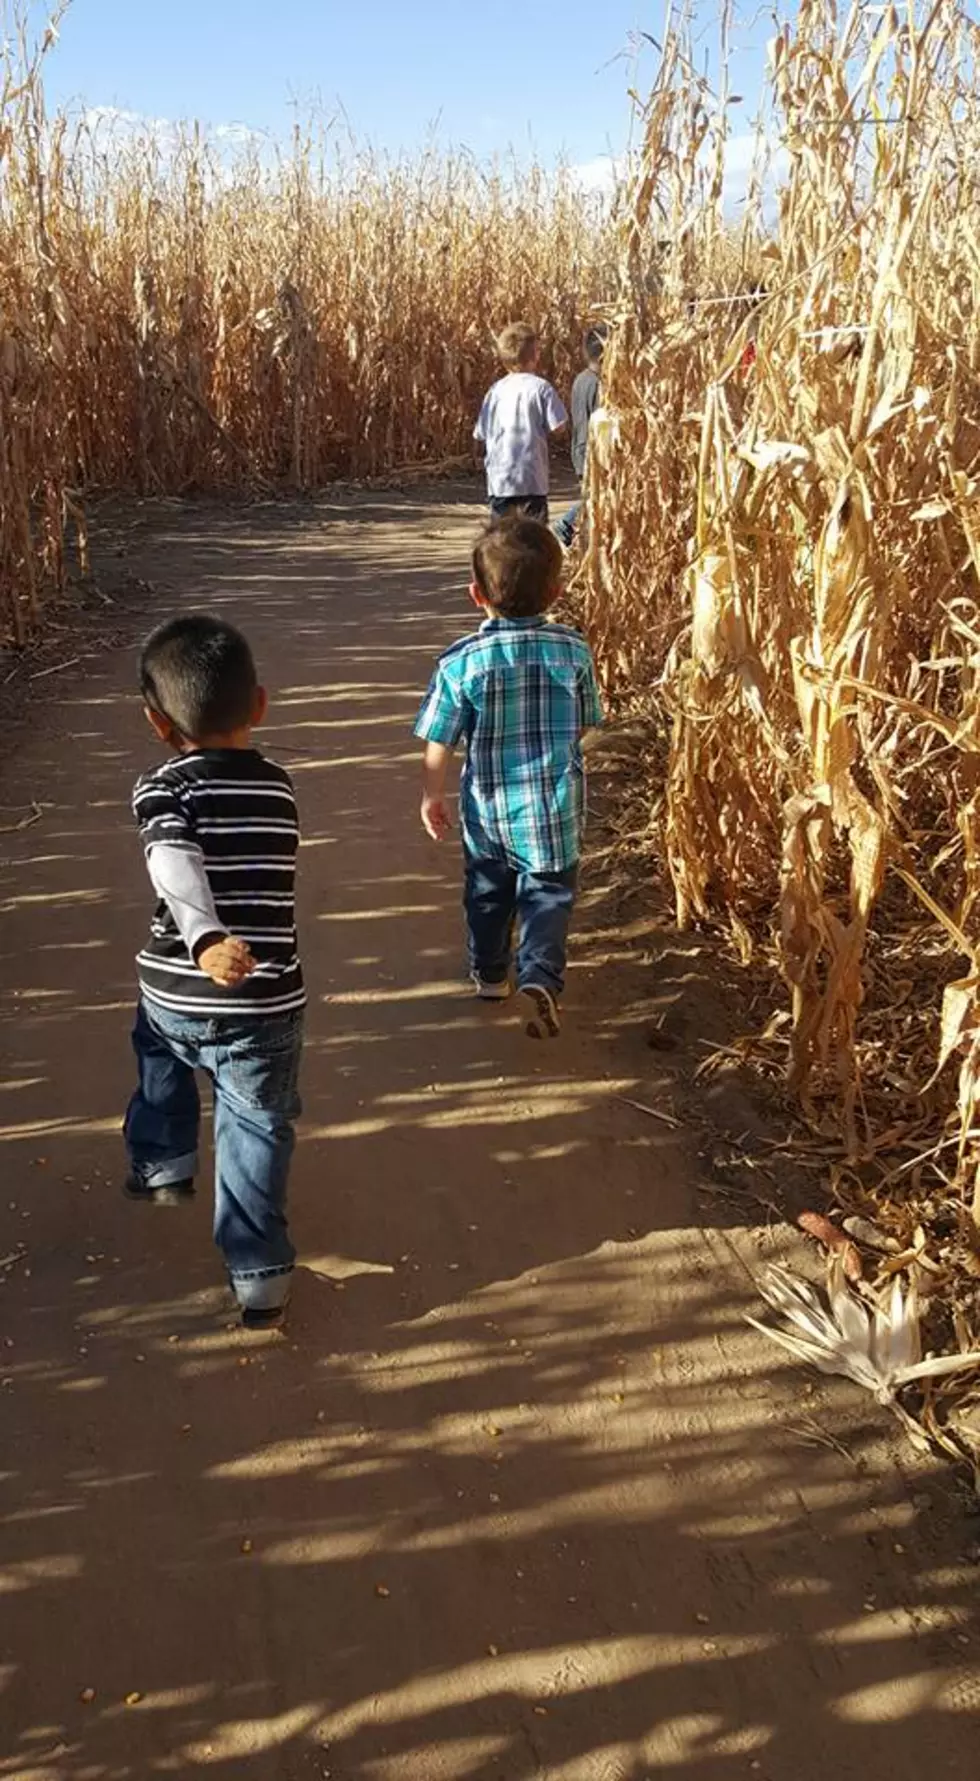 My Weekend &#8211; Rocky Mountain National Park, Fritzler Corn Maze and Grandkids [PICTURES]